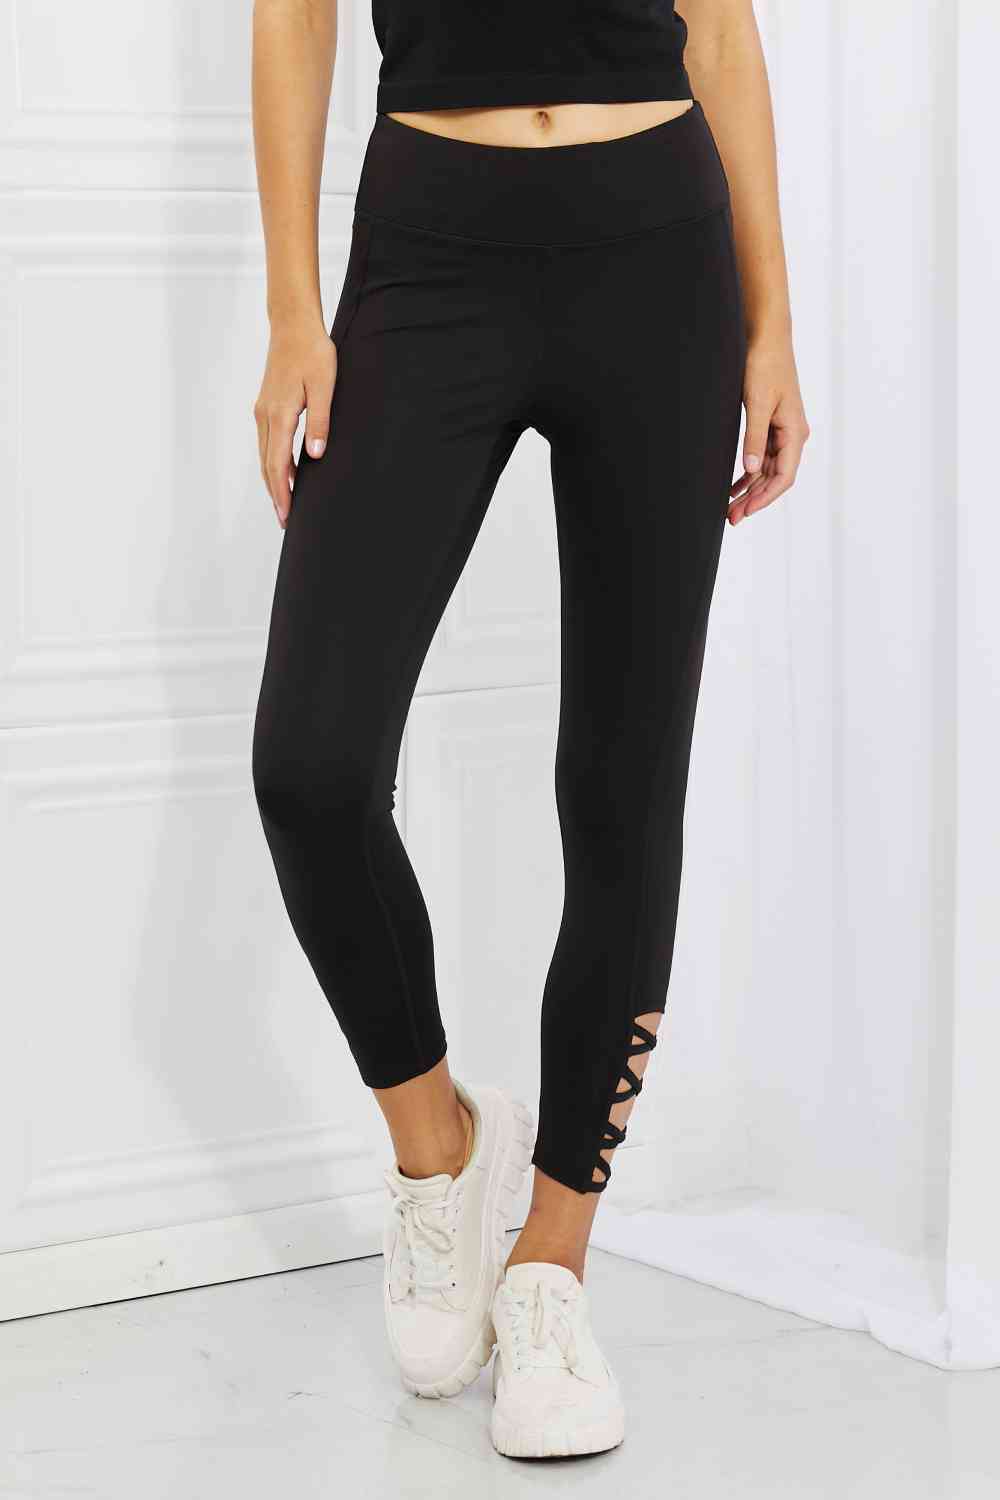 Yelete Ready For Action Full Size Ankle Cutout Active Leggings in Black - Cheeky Chic Boutique